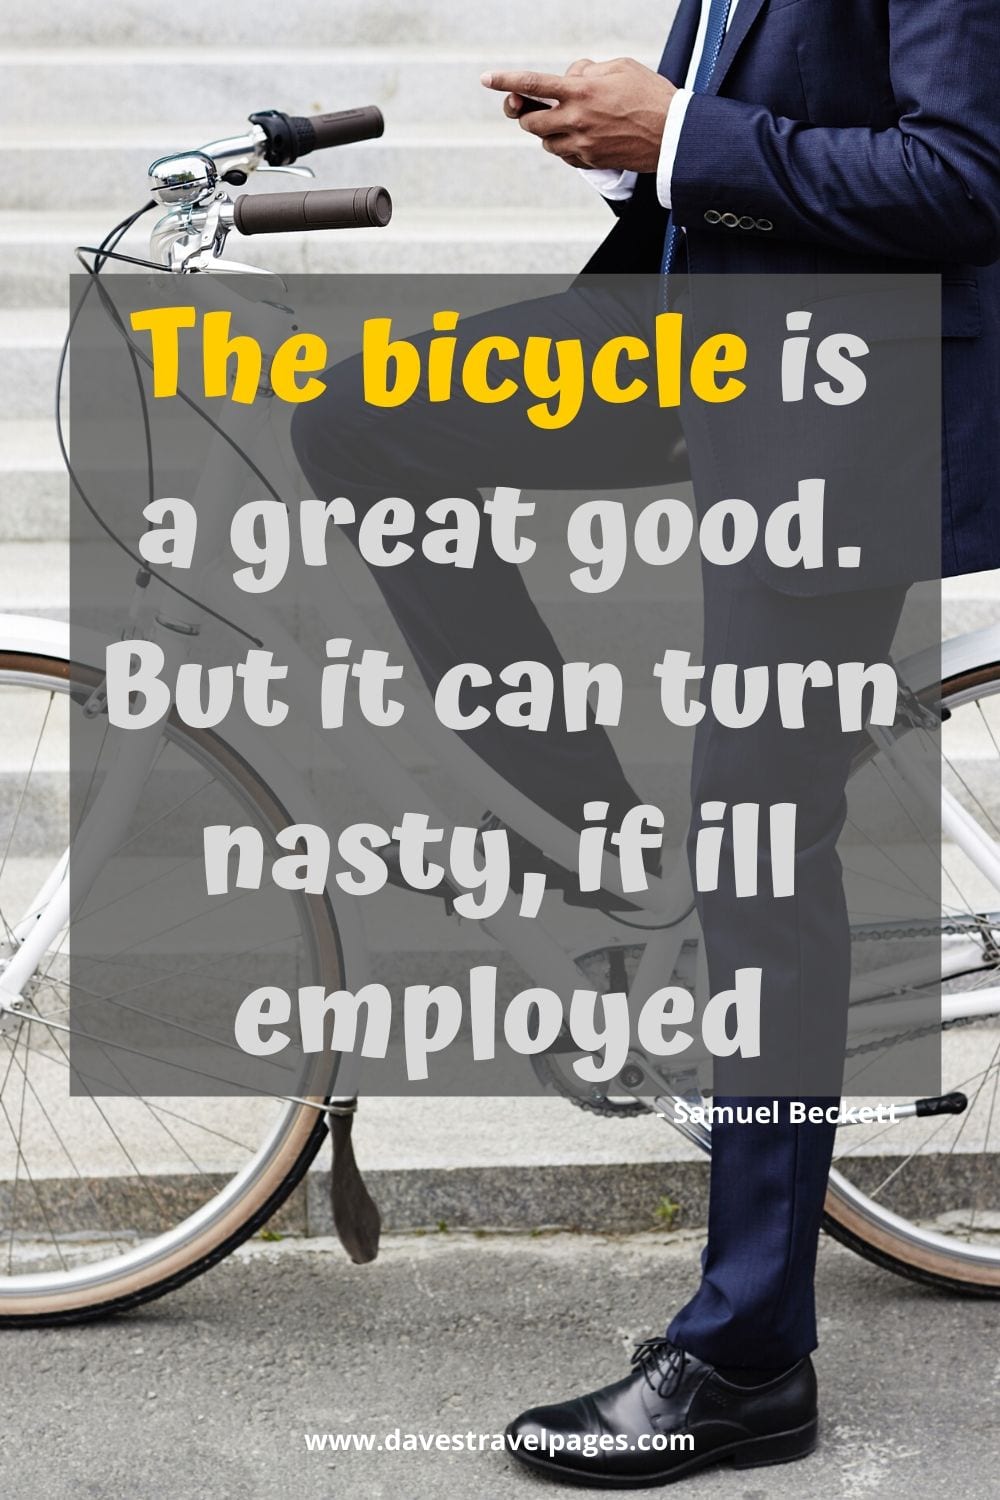 The bicycle is a great good. But it can turn nasty, if ill employed. - Samuel Beckett